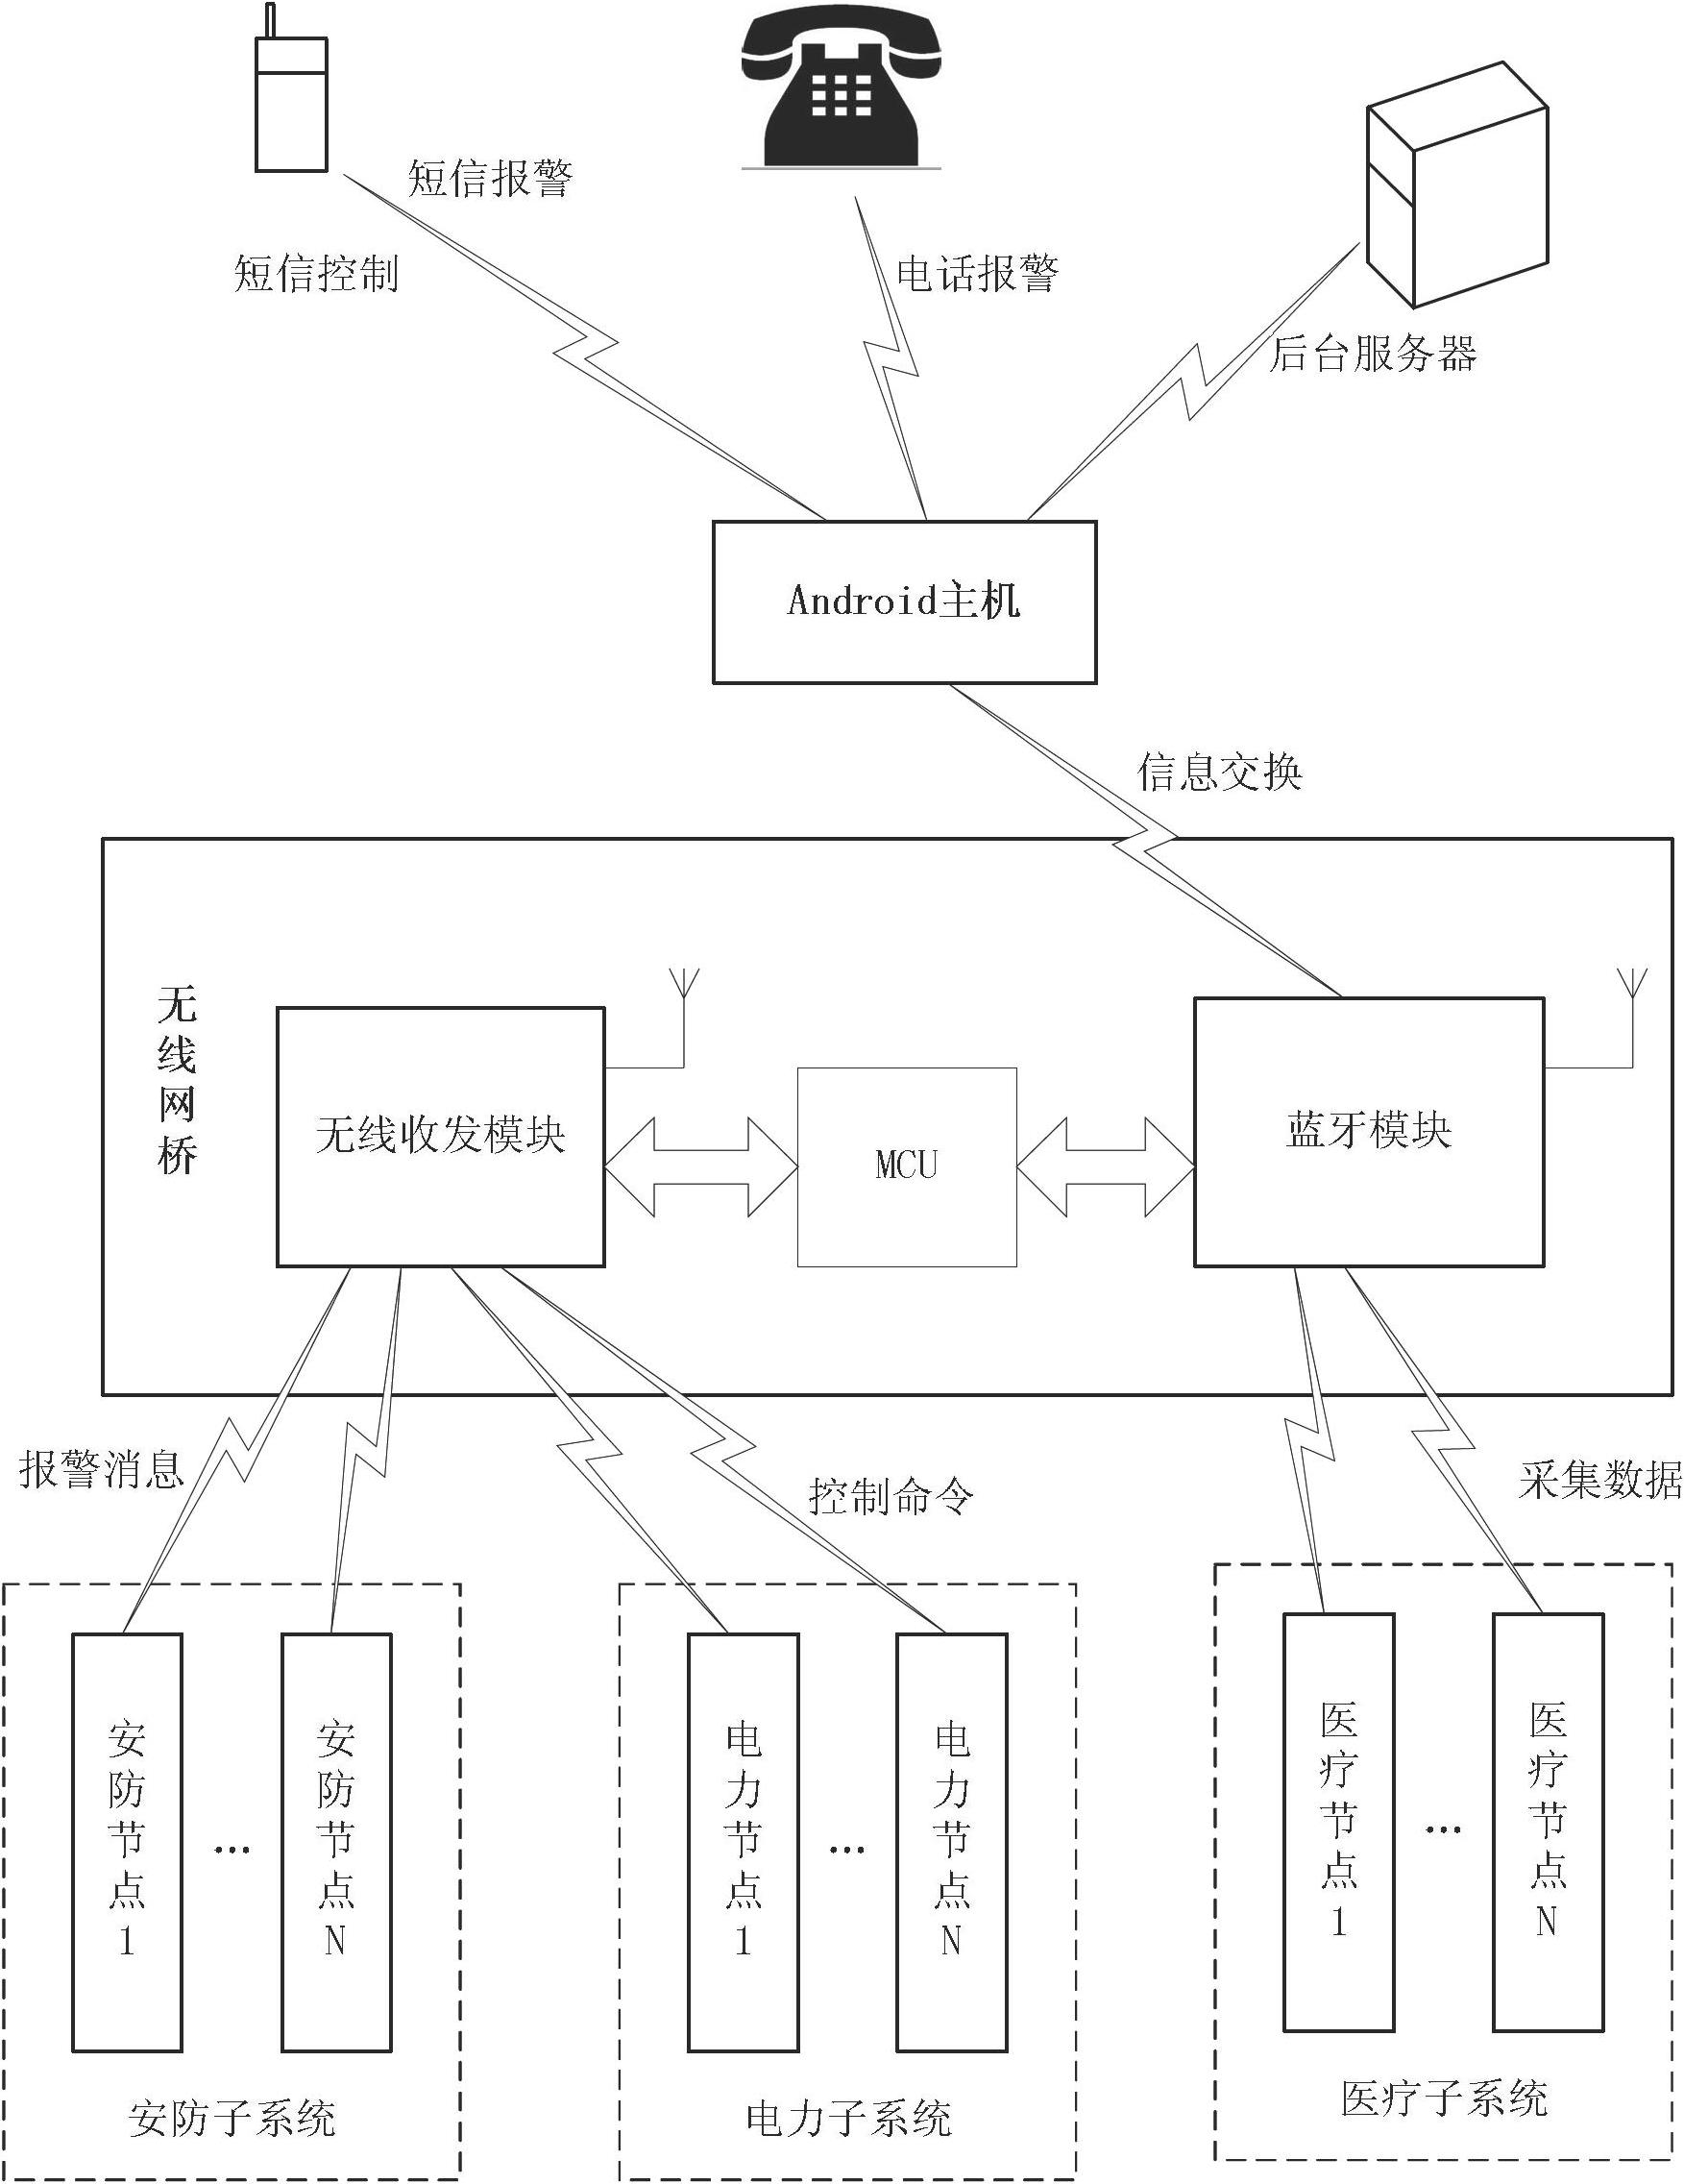 Bluetooth and android technology-based household information system and monitoring control method